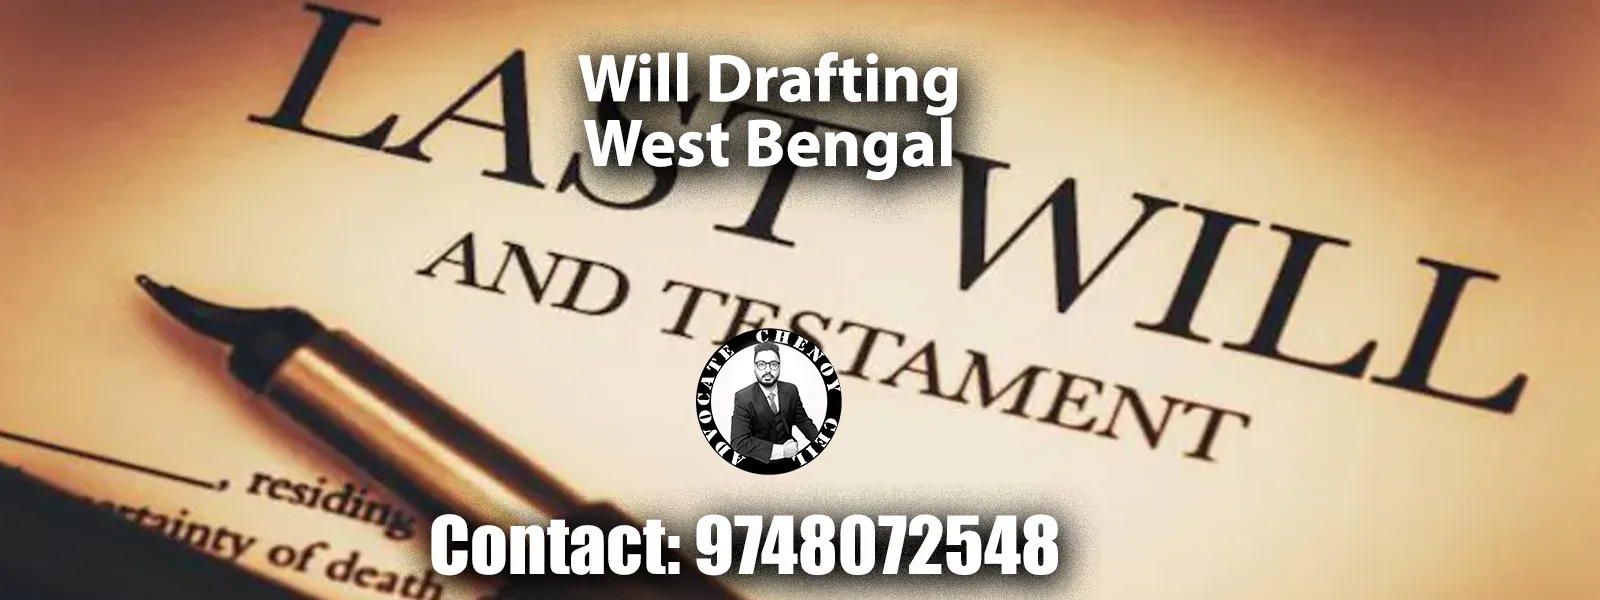 Will Drafting West Bengal